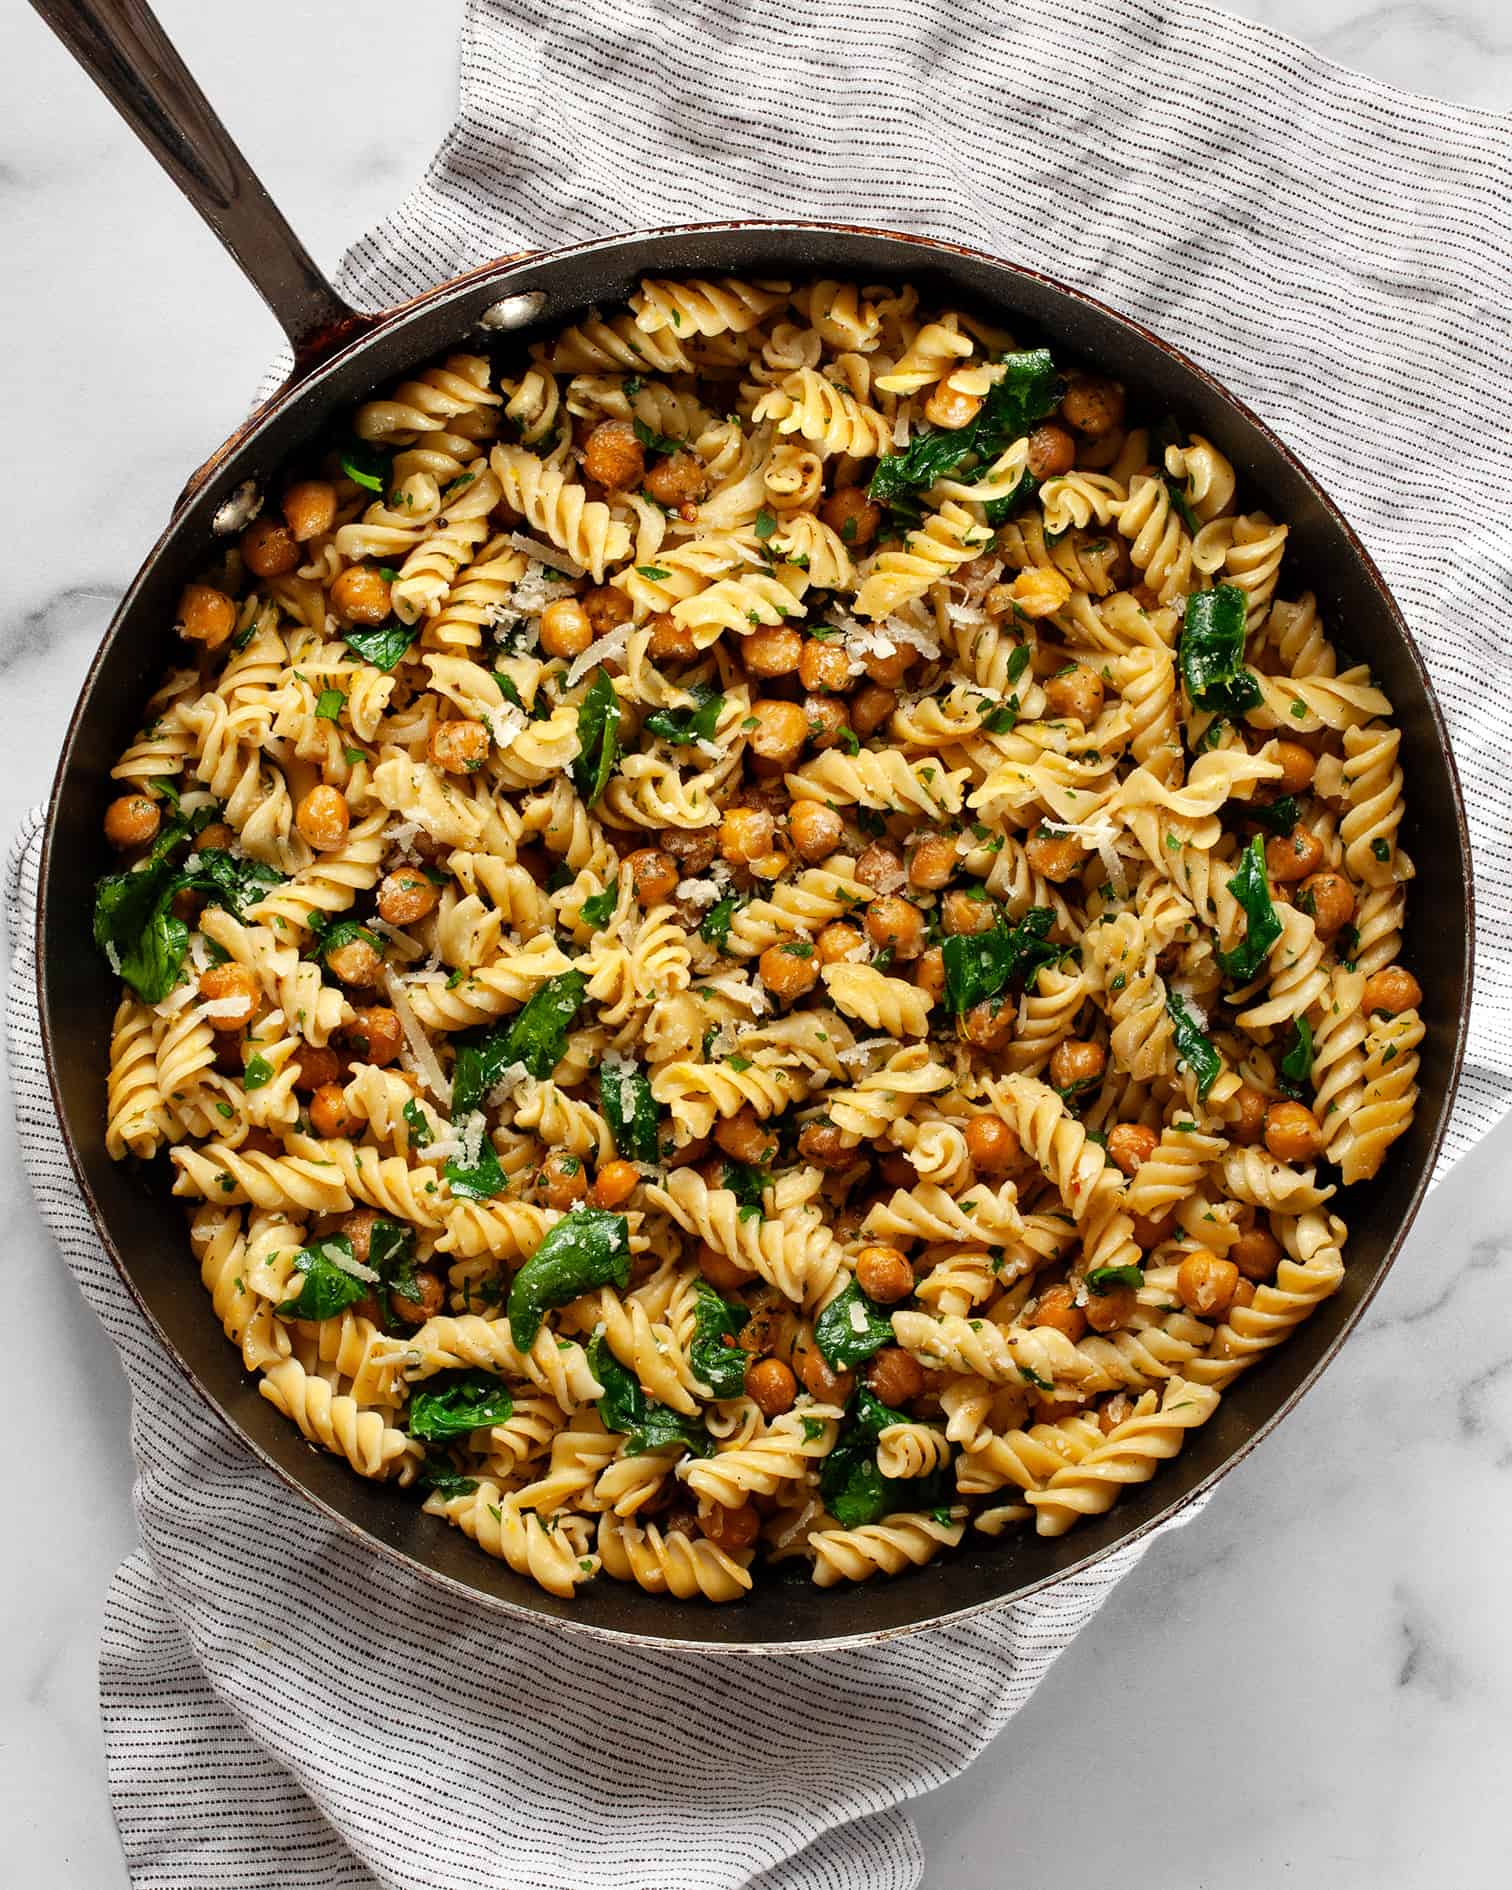 Chickpea pasta with spinach in a skillet.